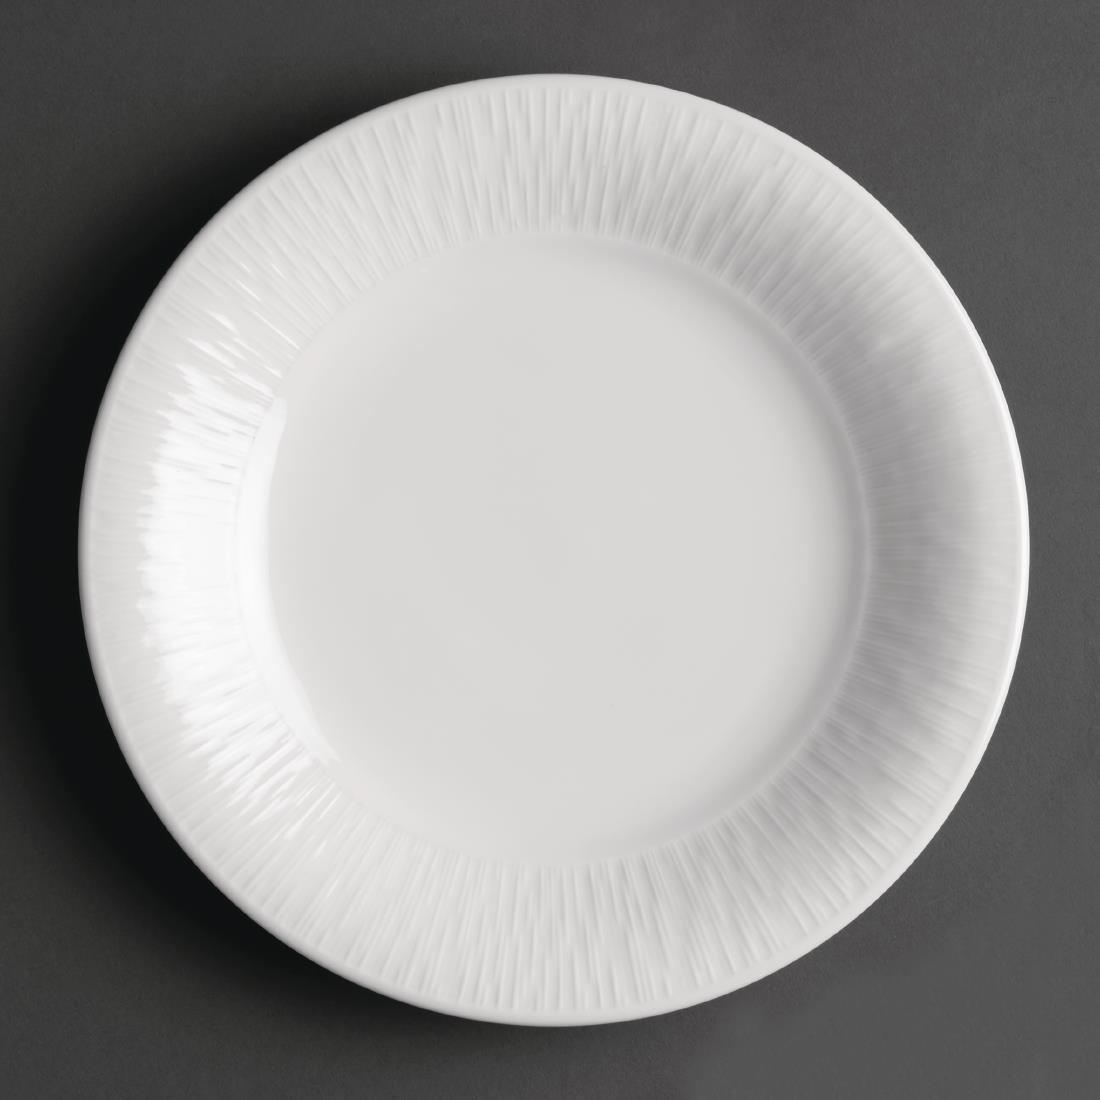 Royal Porcelain Maxadura Solario Plate 230mm (Pack of 12) - GT914  - 1